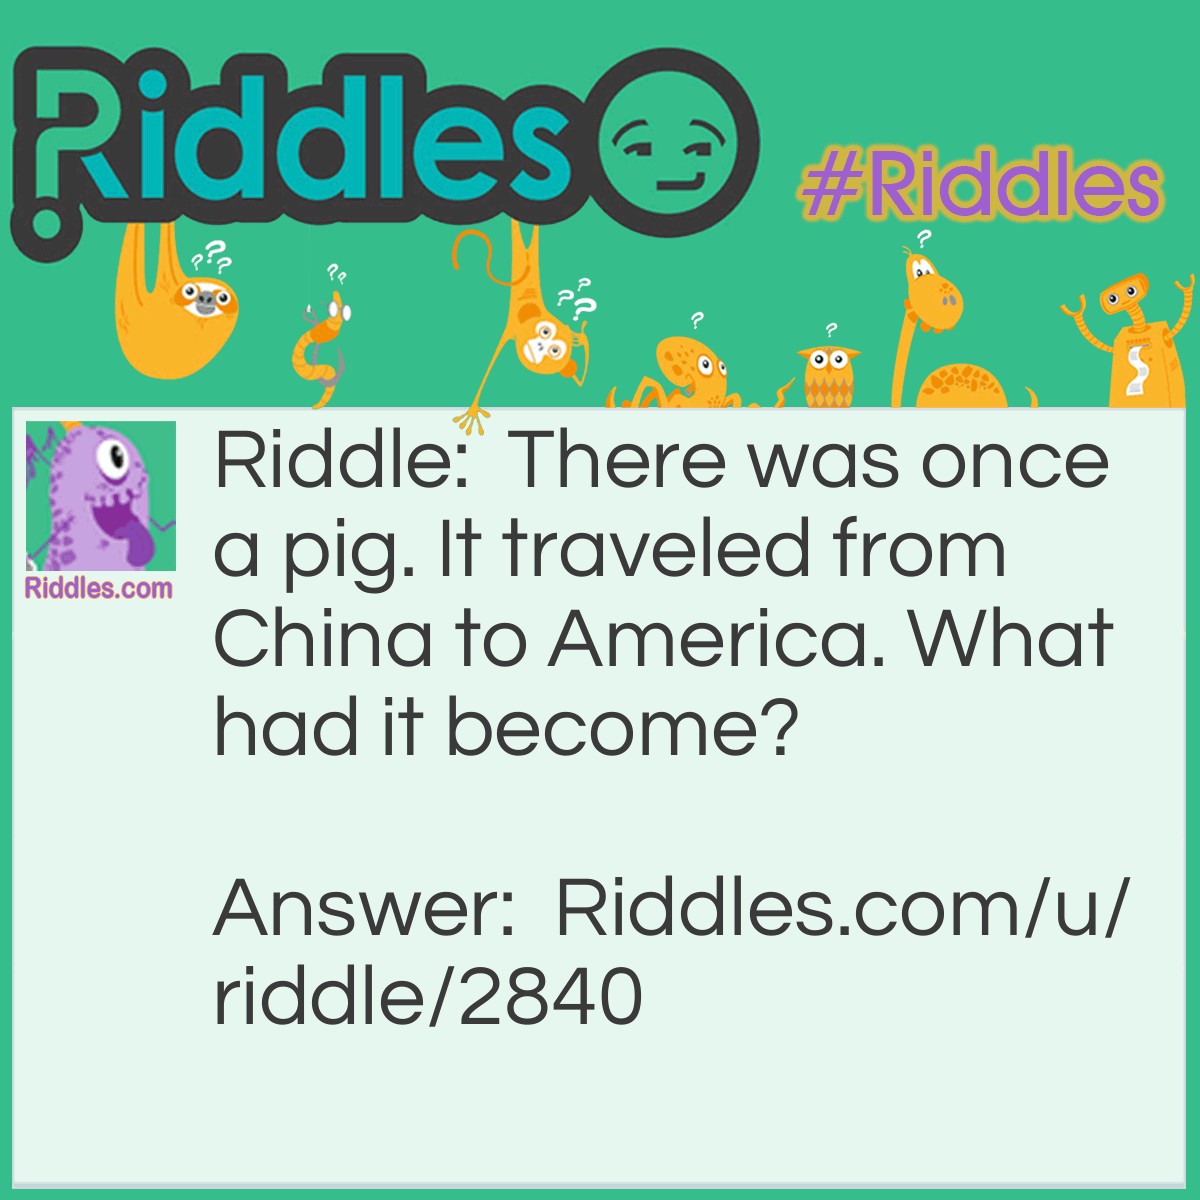 Riddle: There was once a pig. It traveled from China to America. What had it become? Answer: Pig!